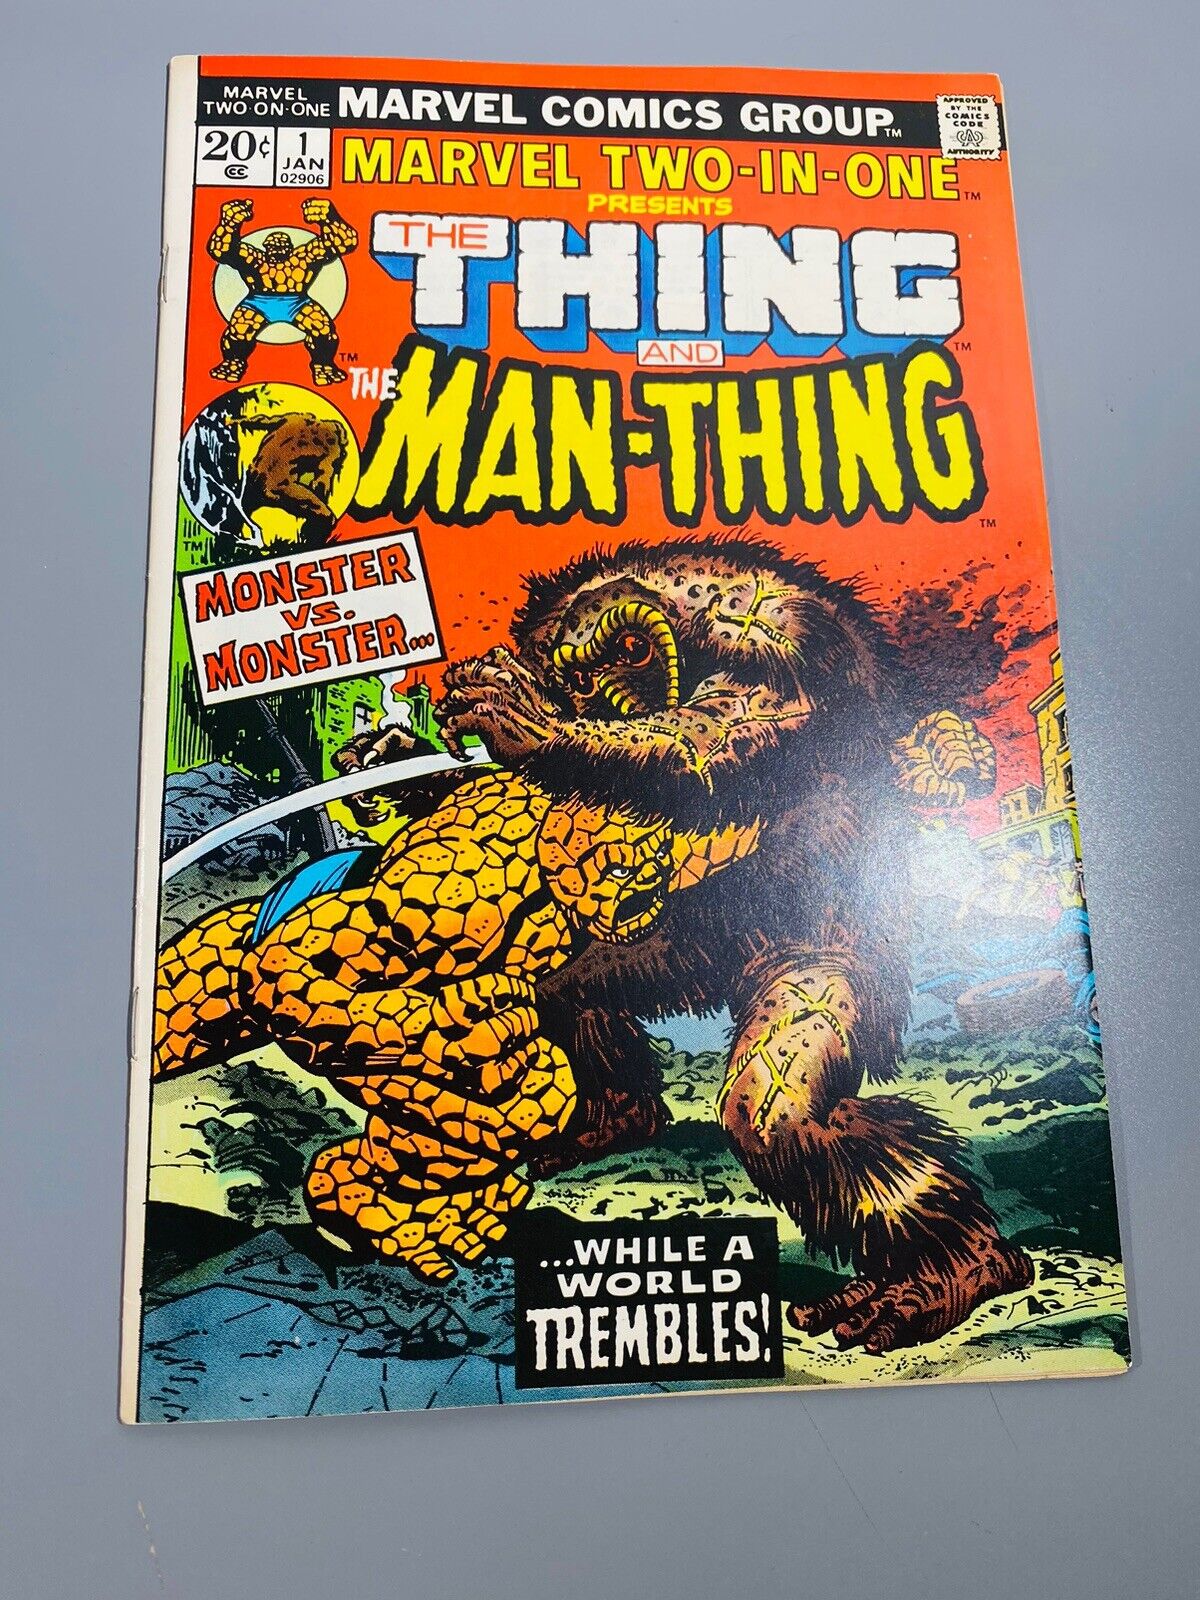 MARVEL TWO-IN-ONE #1 NM- (9.2) The Thing and Man-Thing Marvel, 1974 1st Print